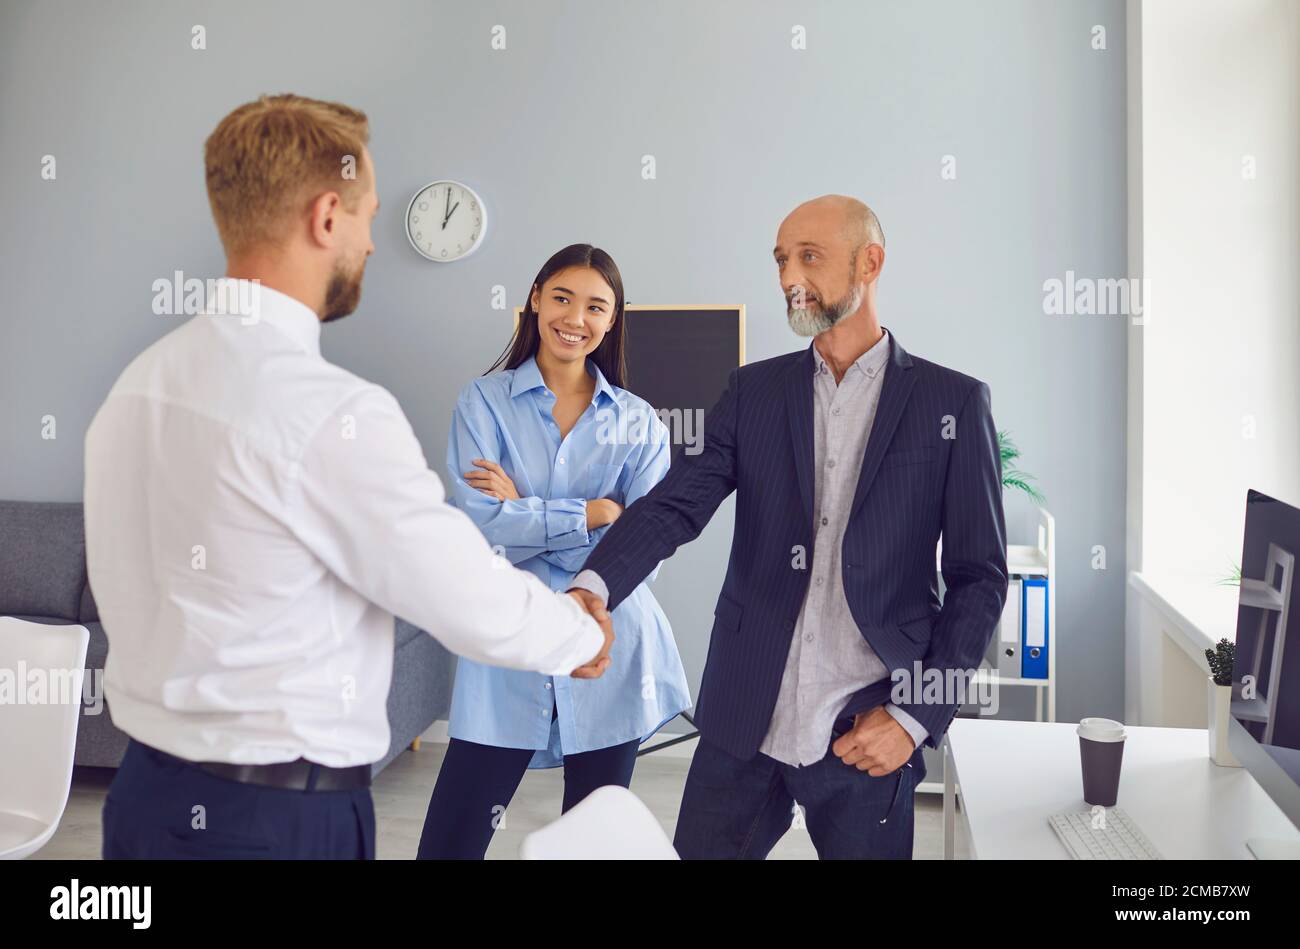 Friendly male company manager and aged client shaking hands confirming a business deal Stock Photo